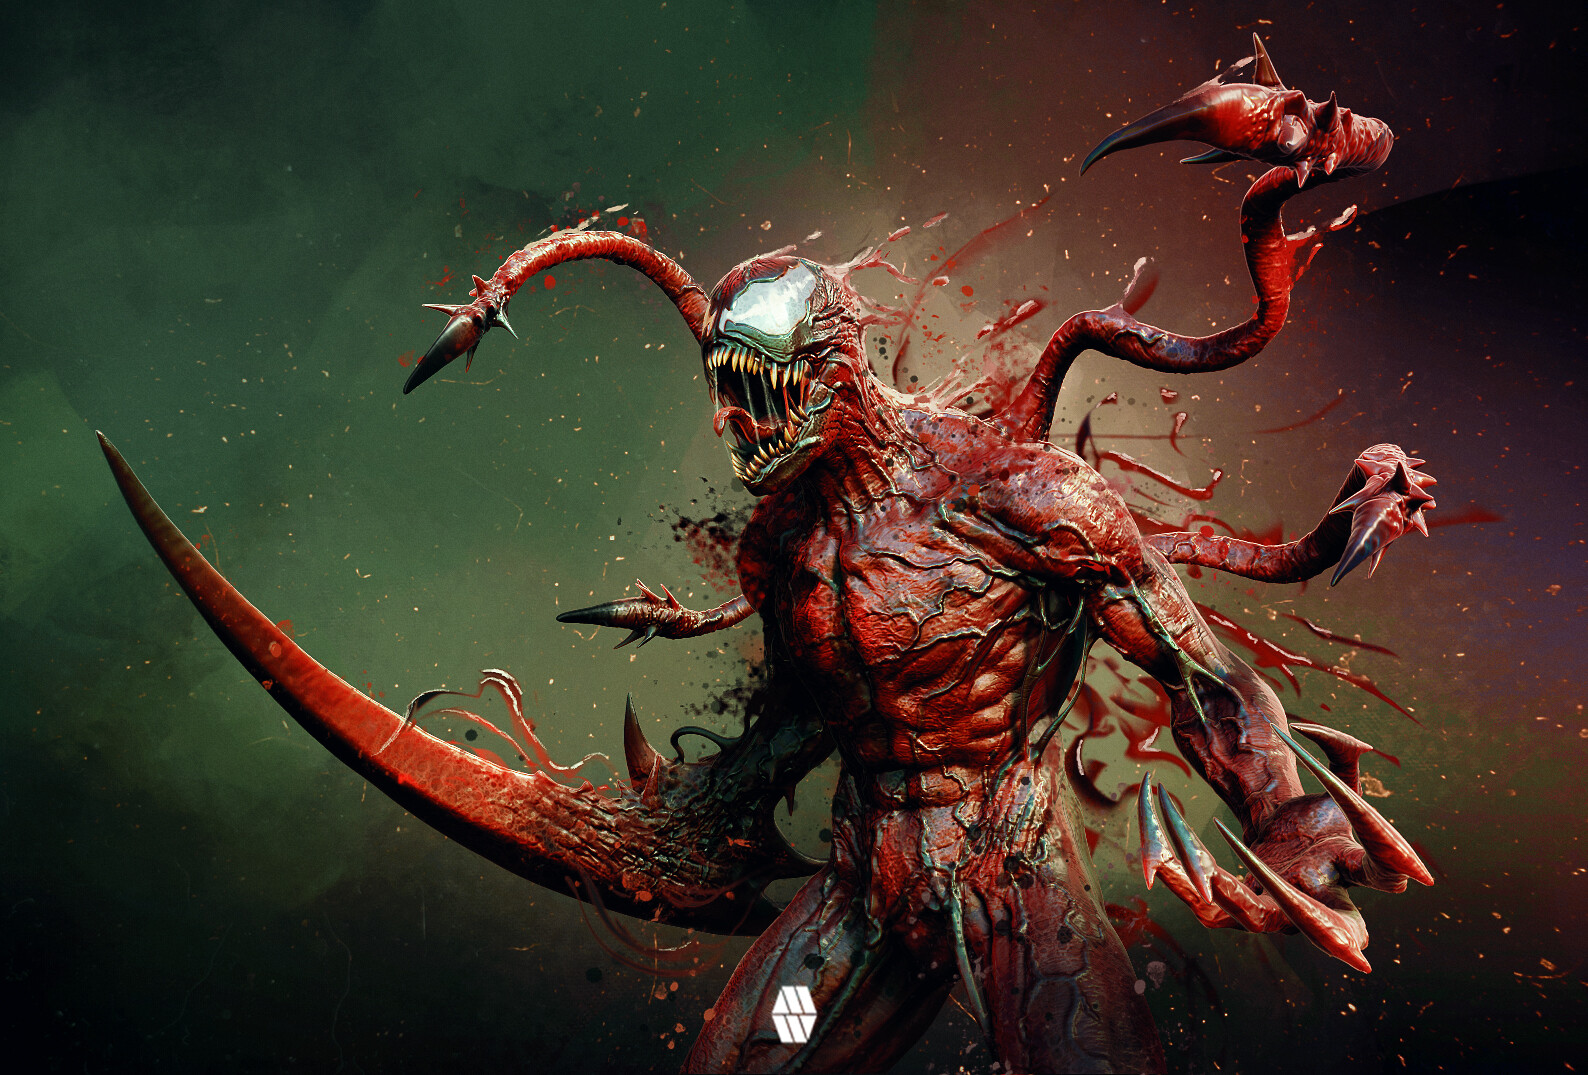 A Monster Calls - Maximum Carnage Personal Project